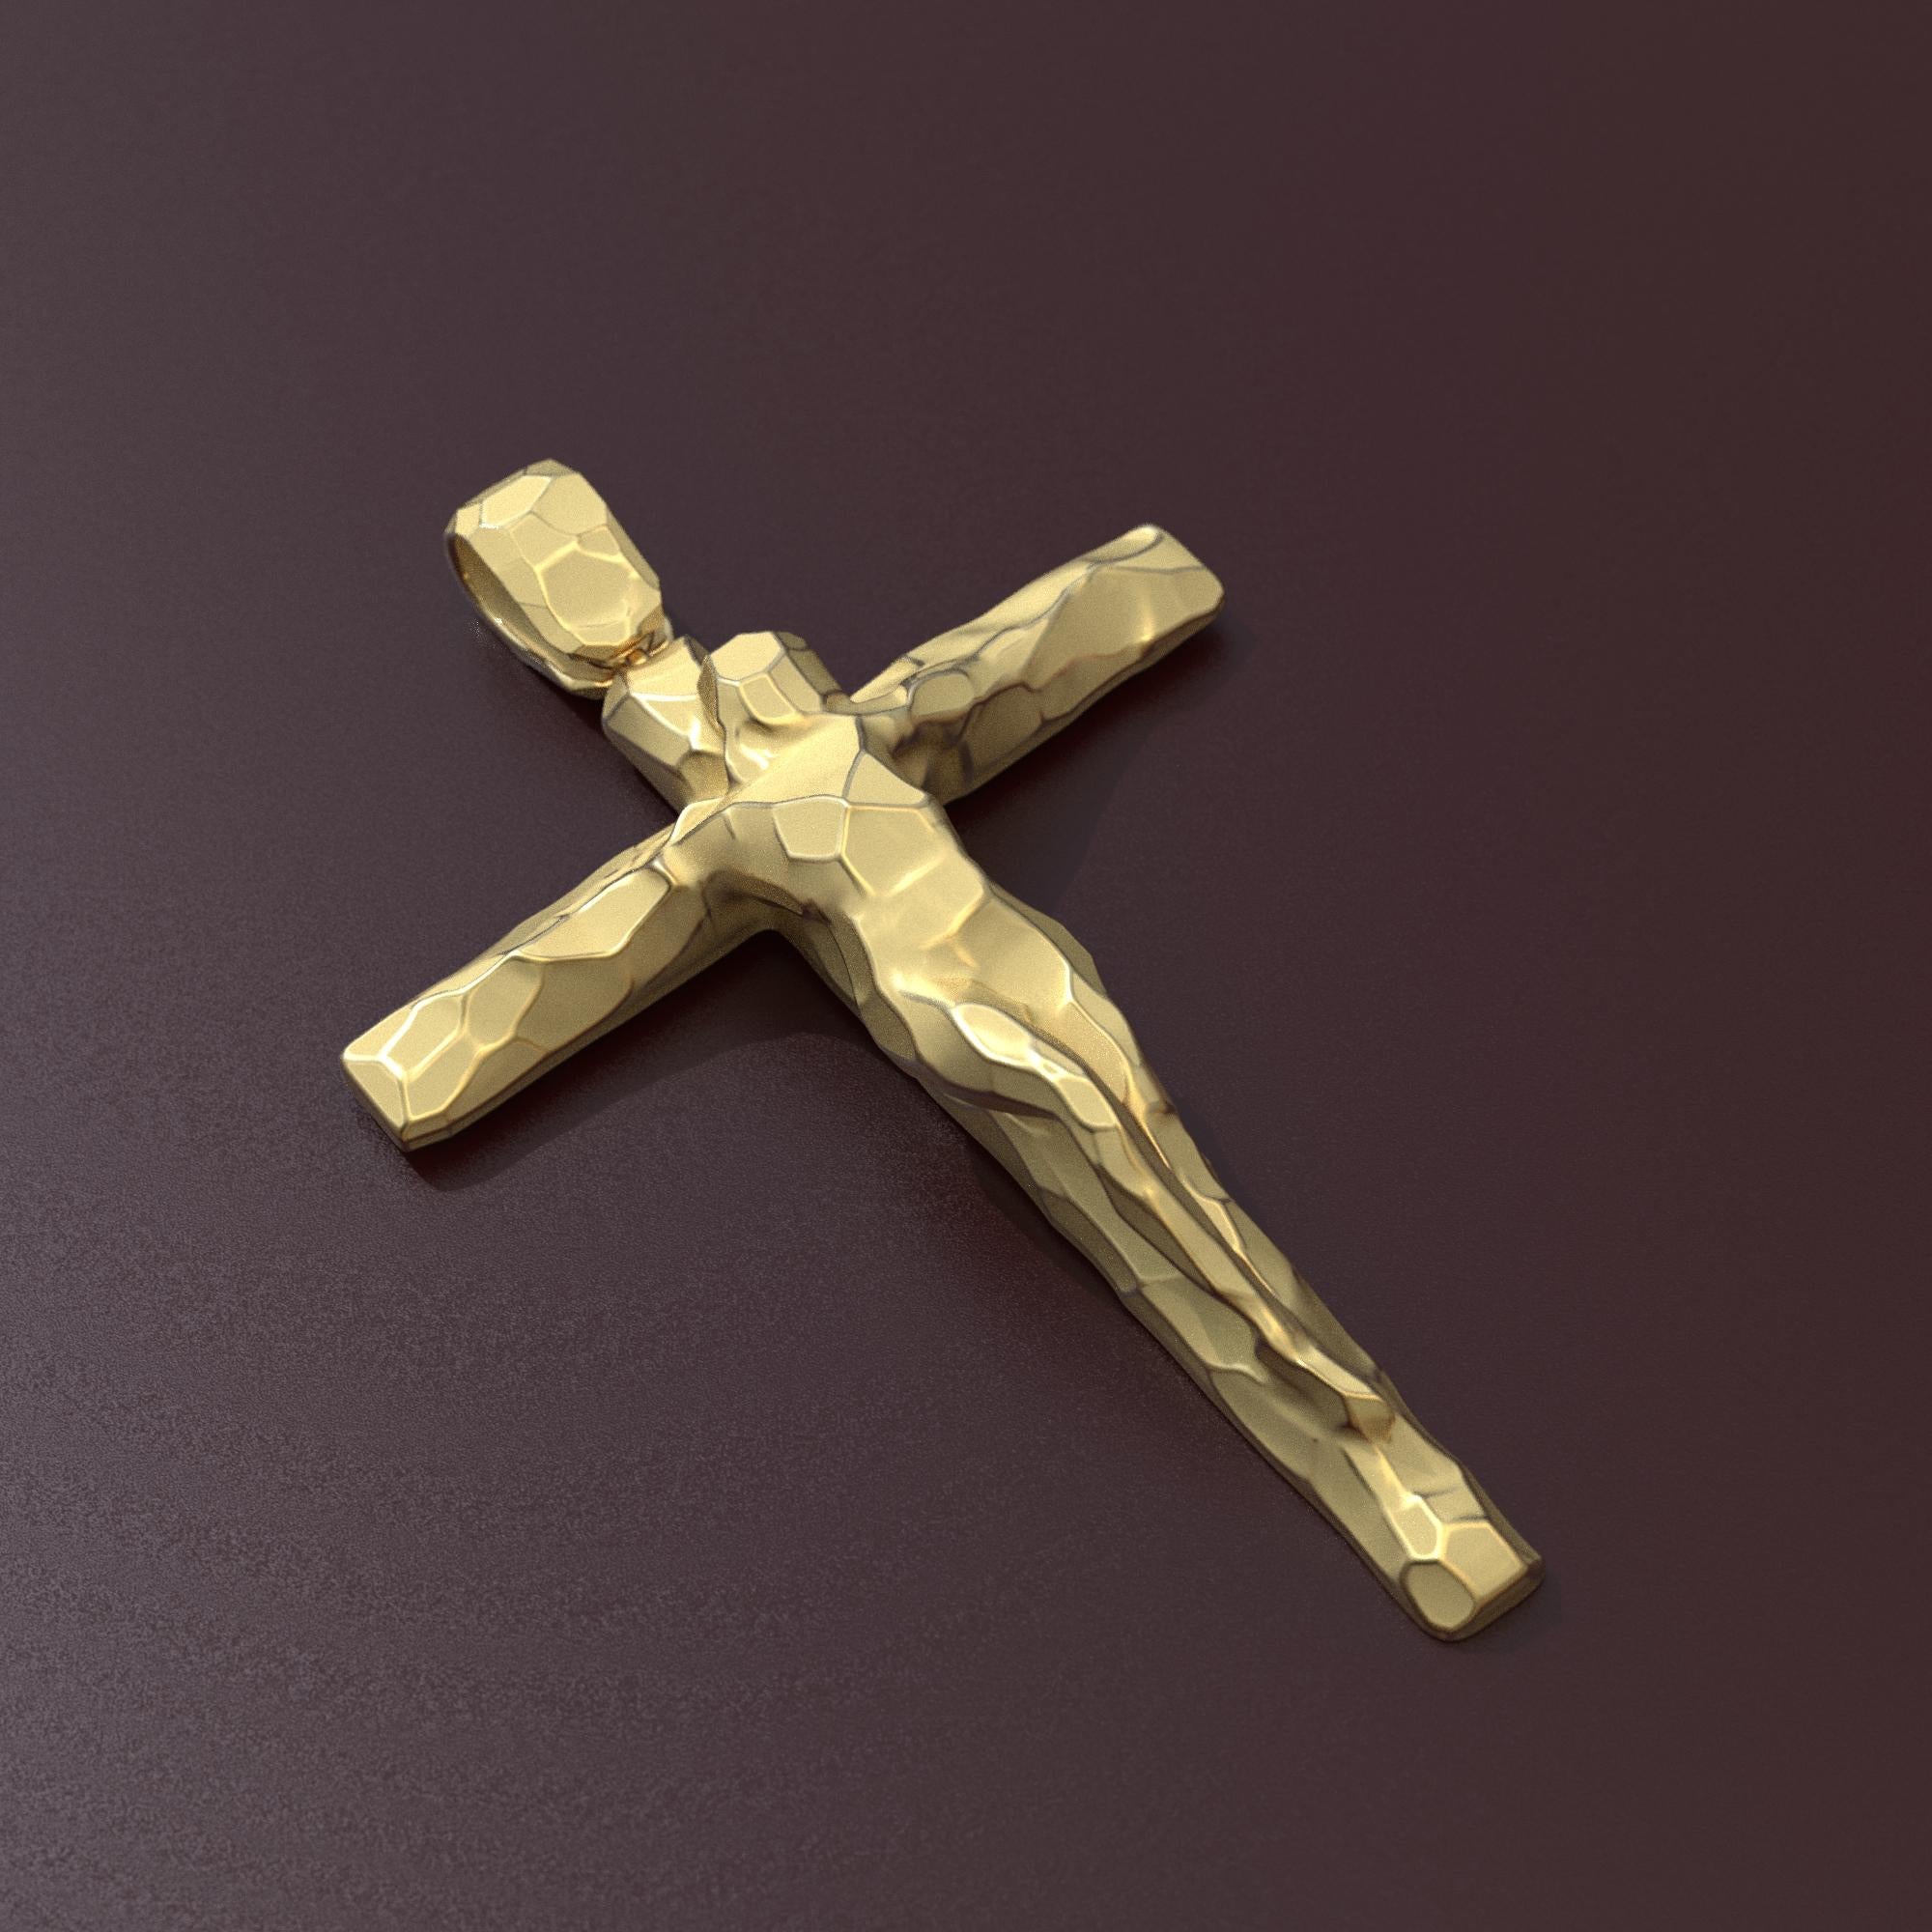 Modern 18k Italian Gold Crucifix Pendant Necklace for Men, only made to order. For Sale